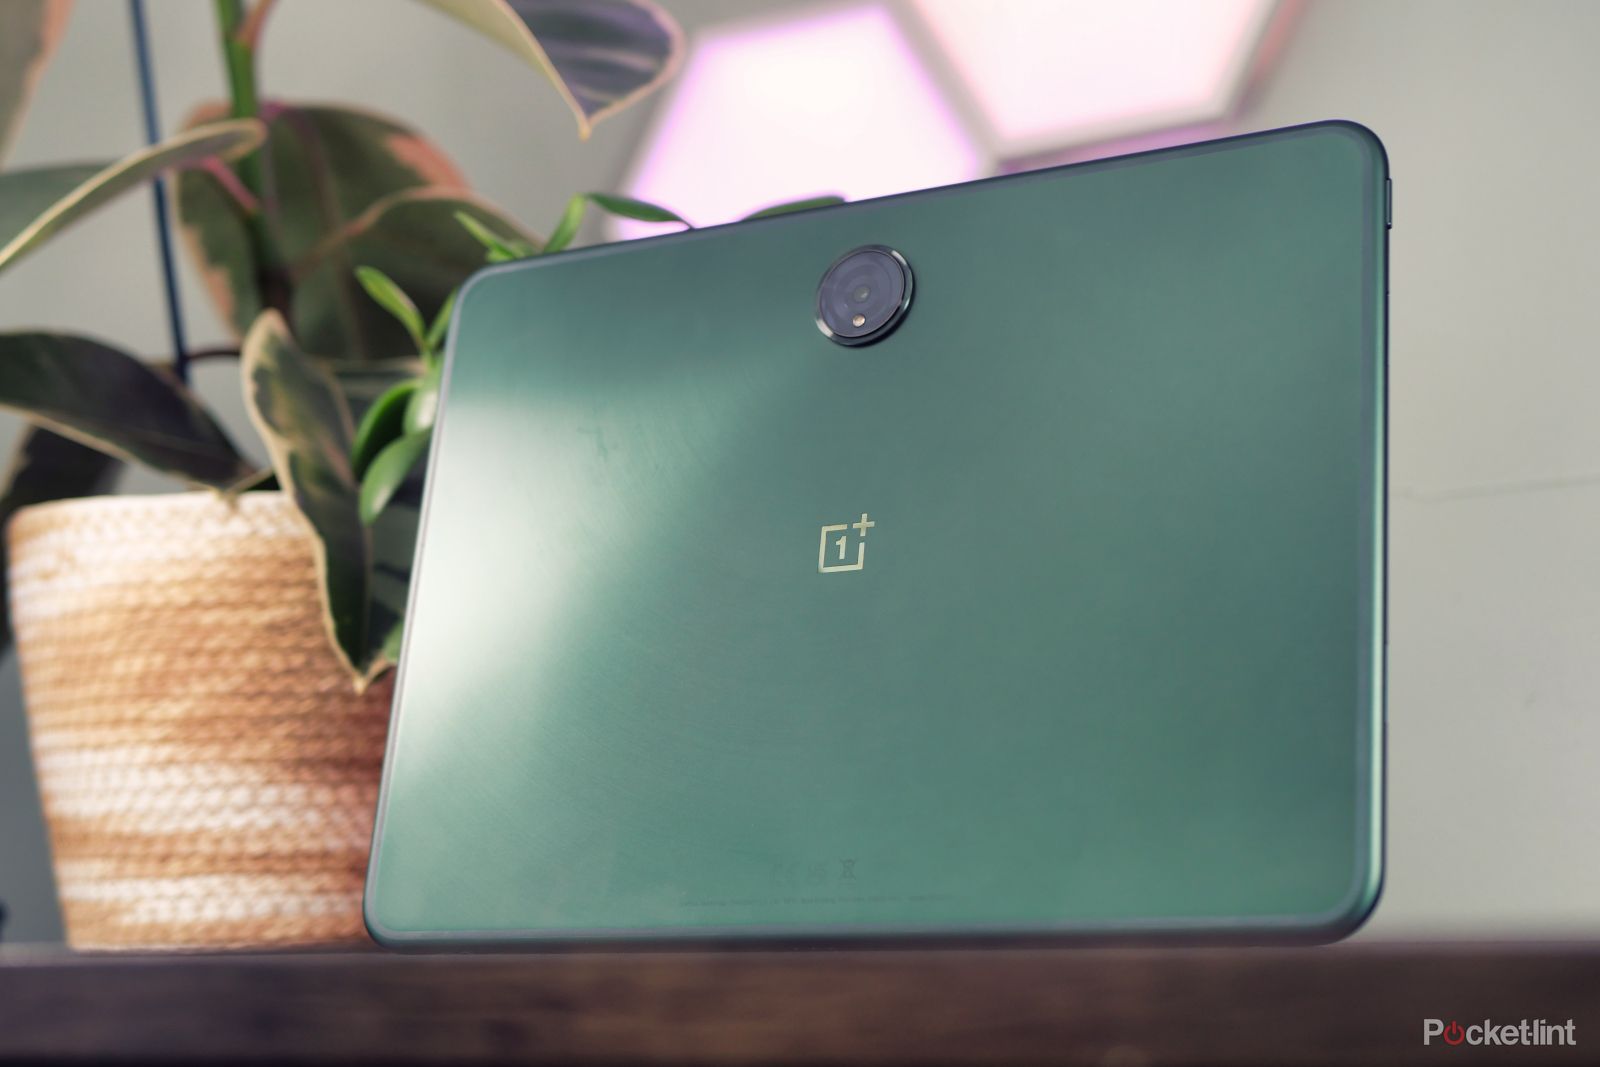 OnePlus Pad Review: An Affordable, Mainstream Android Tablet